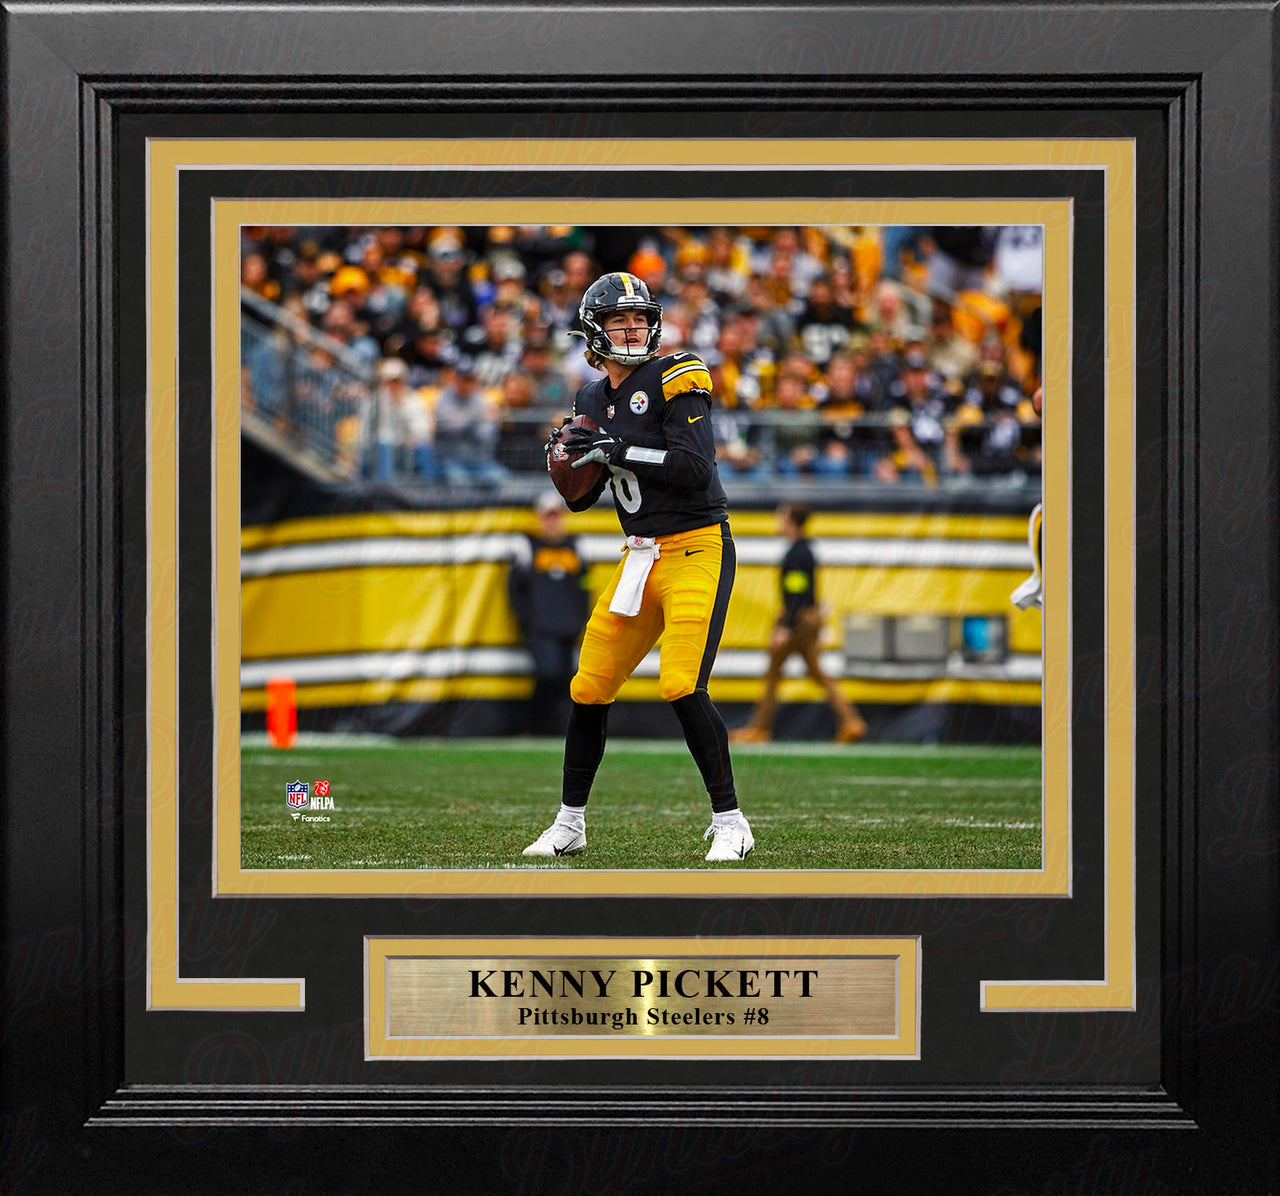 Kenny Pickett in Action Pittsburgh Steelers 8" x 10" Framed Football Photo - Dynasty Sports & Framing 